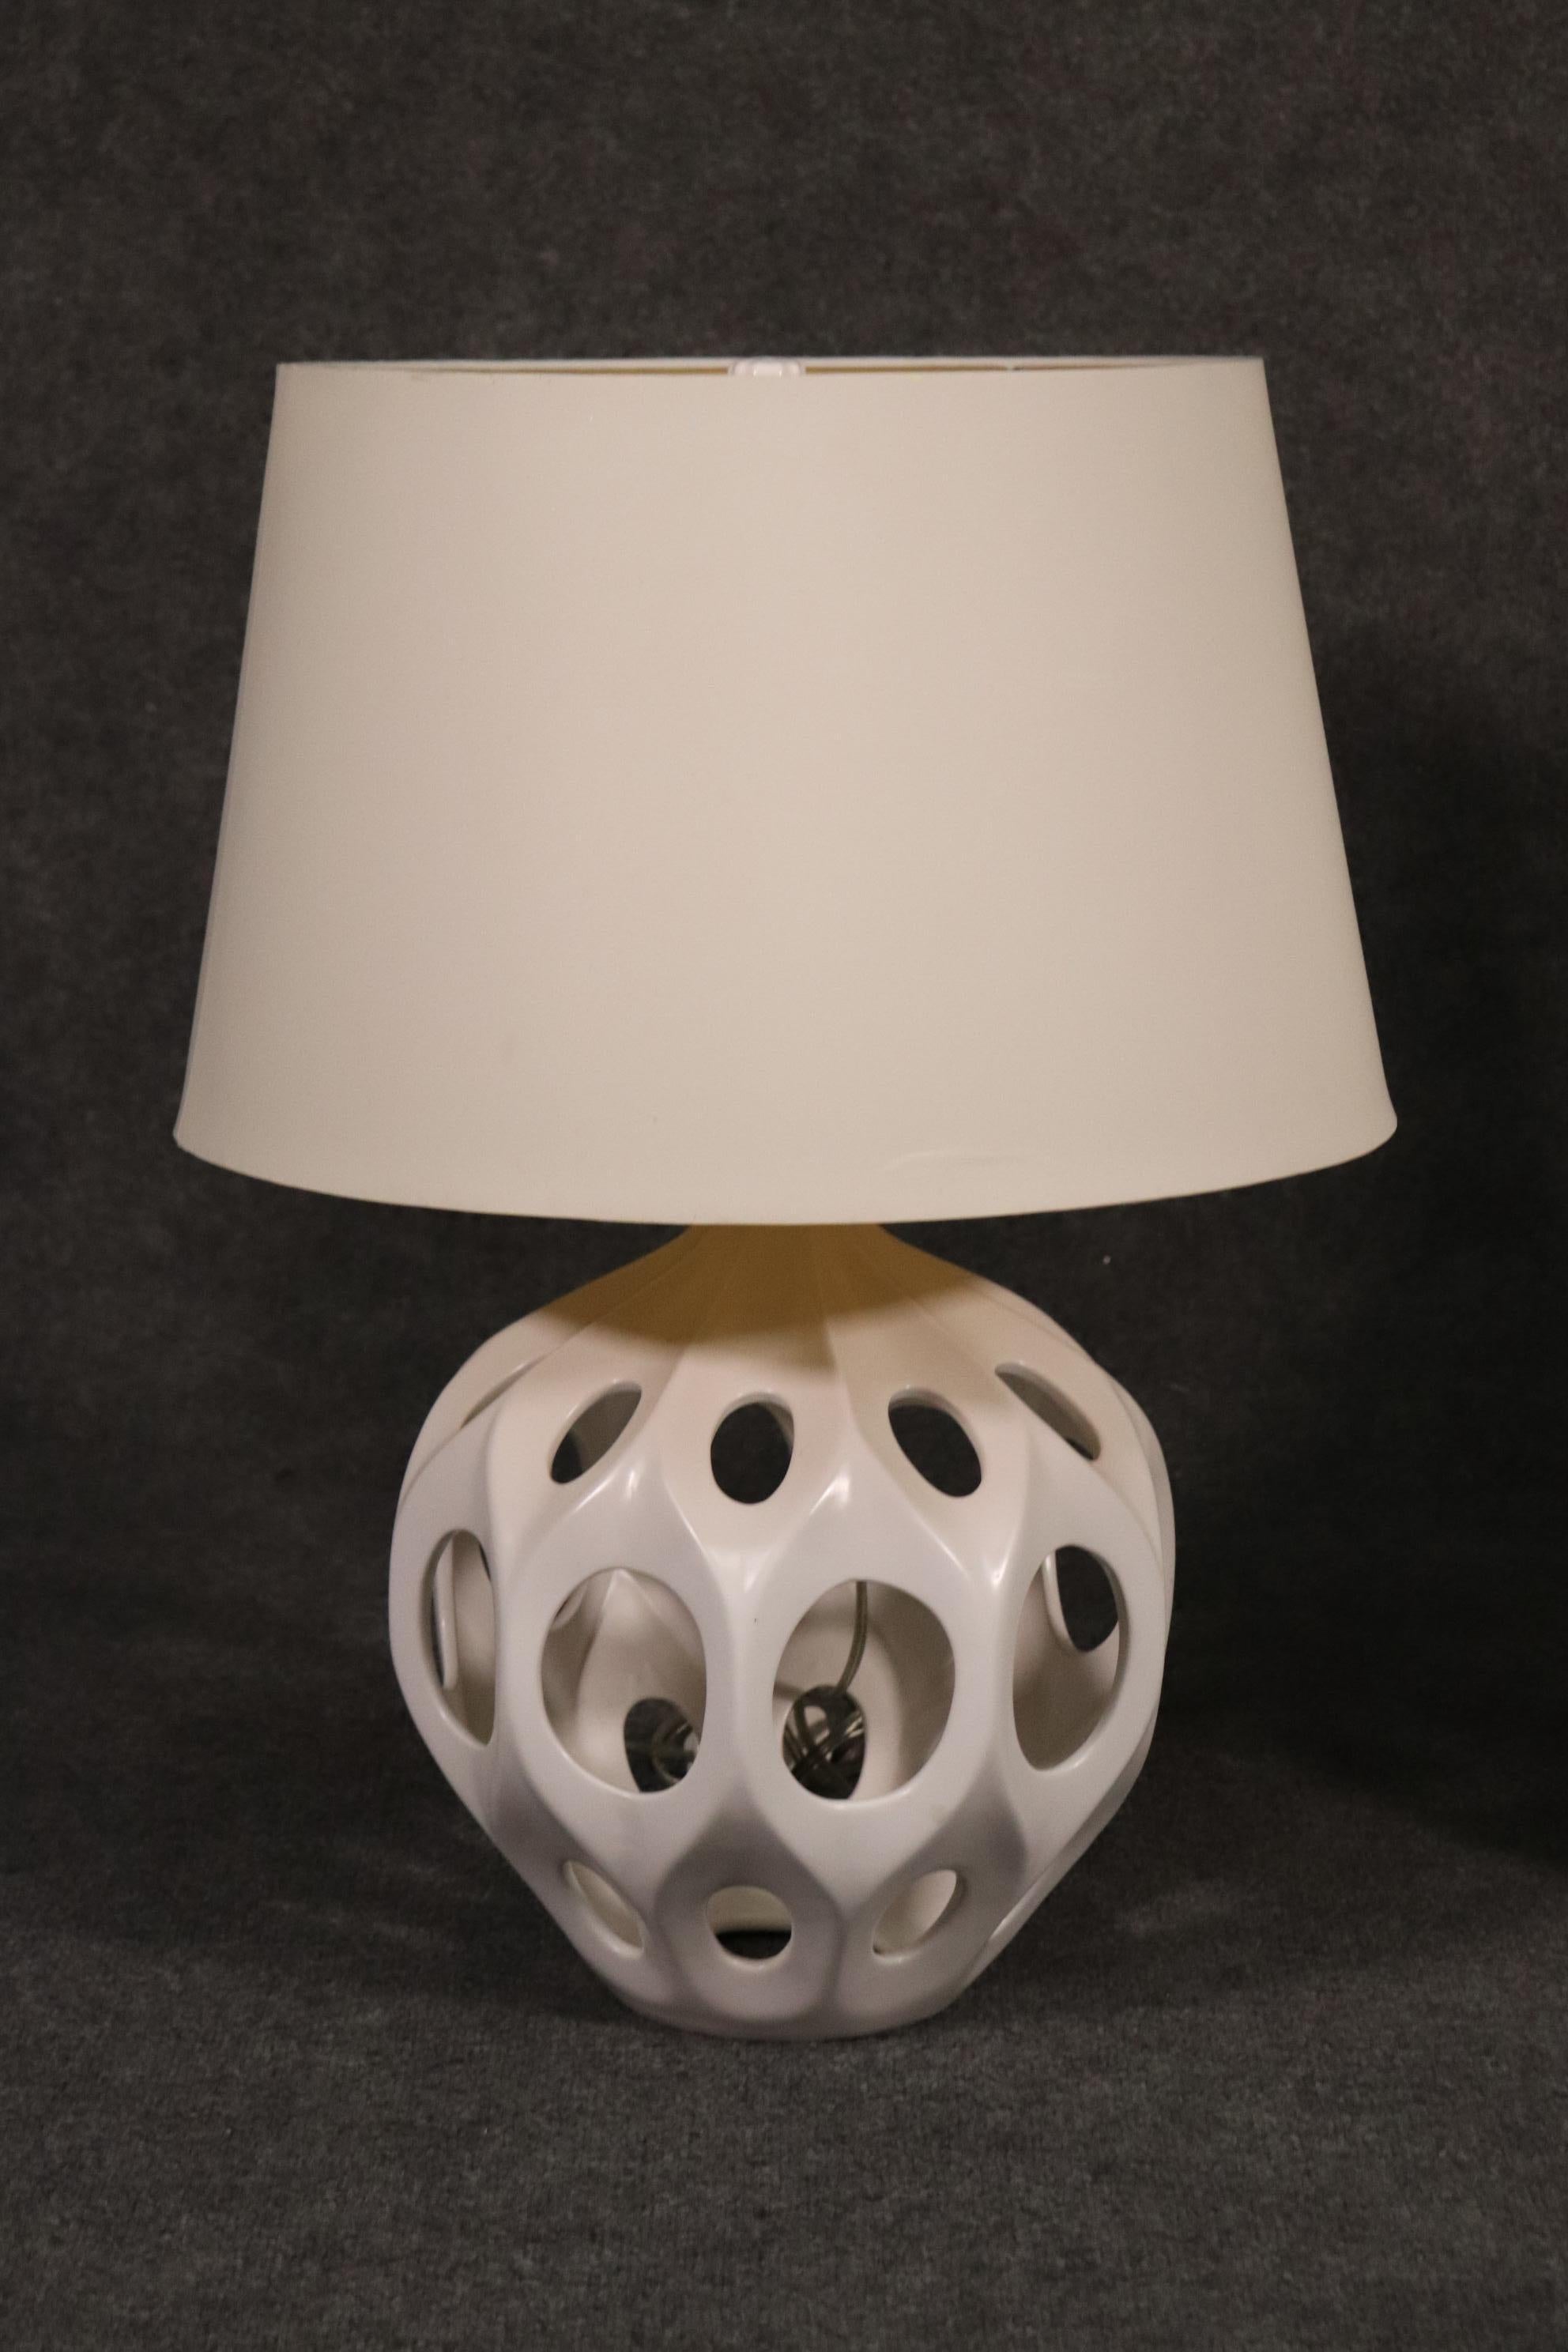 This is a beautiful pair of Mid-Century Modern style lamps. The lamps are absolutely beautifully designed and offer a 